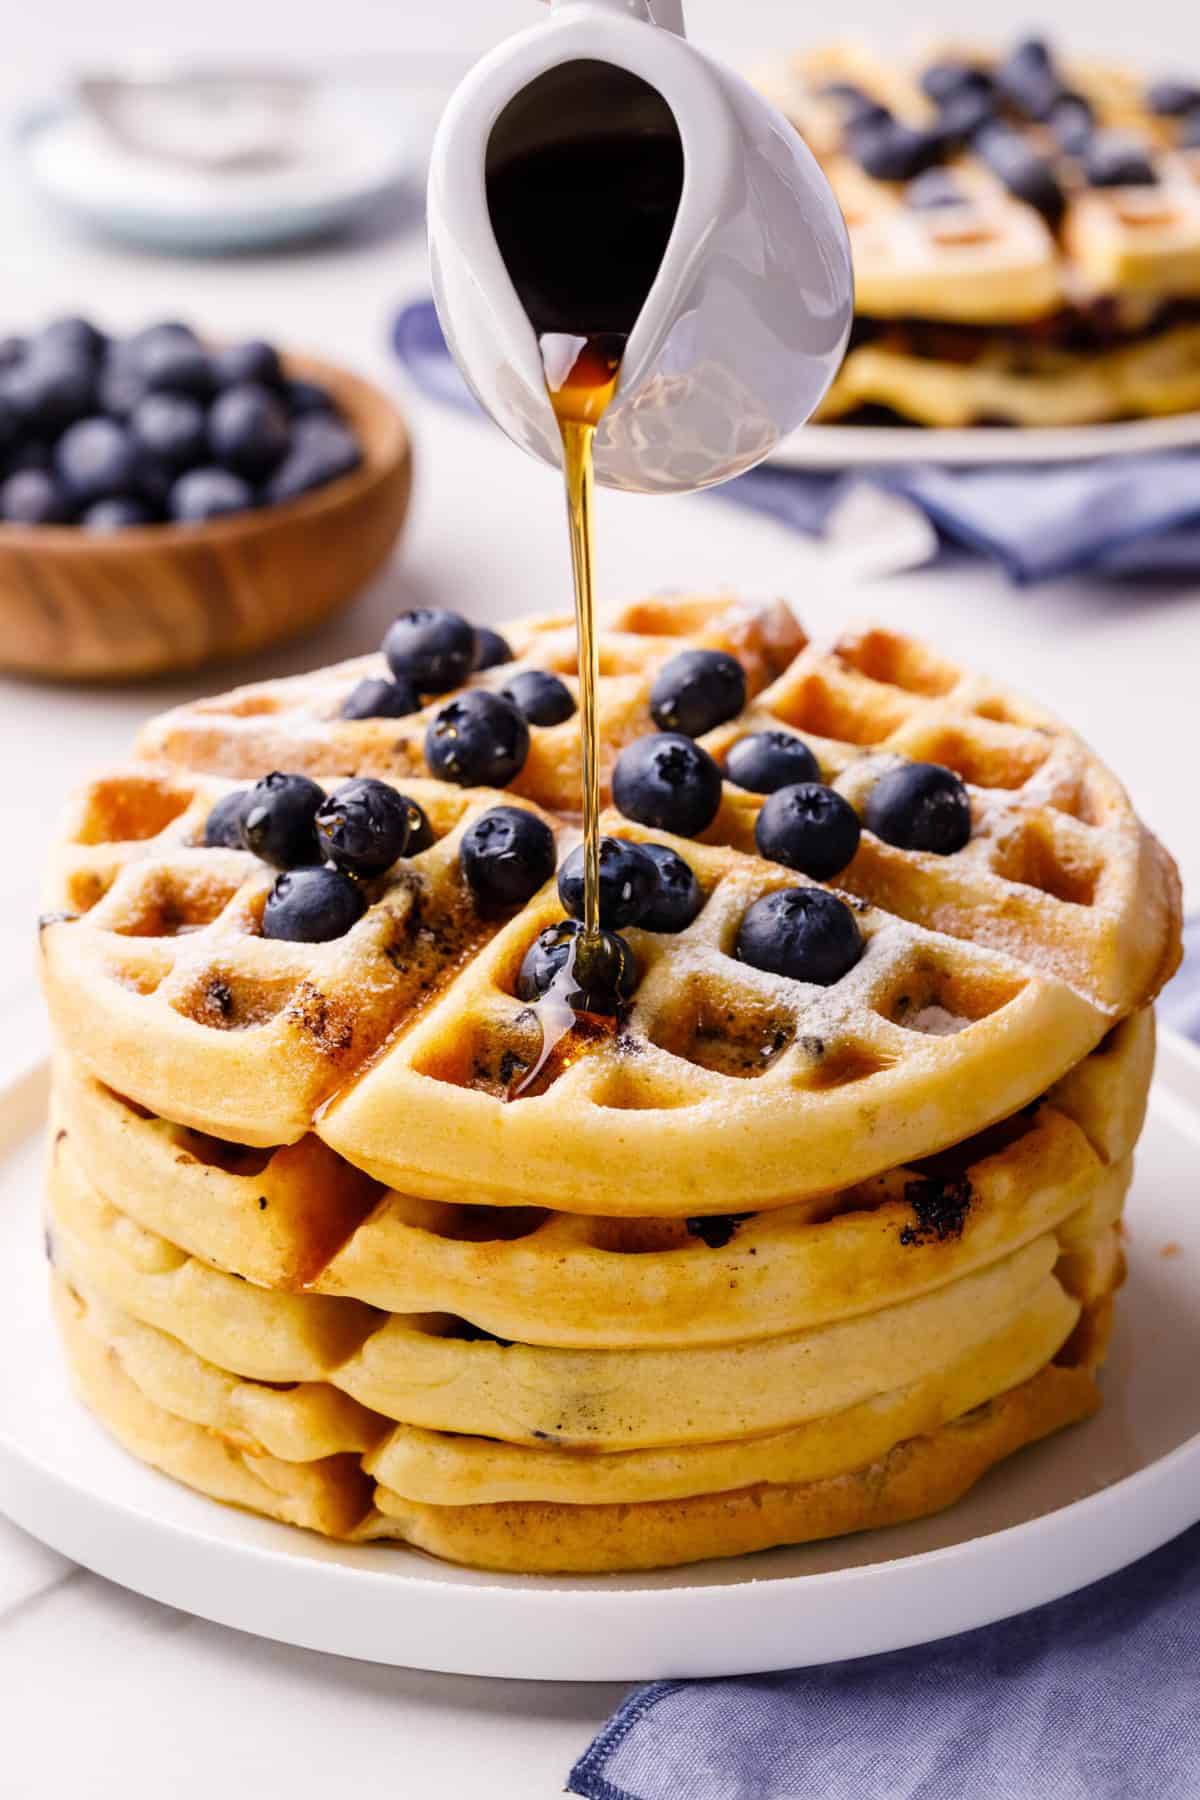 syrup being poured on a stack of homemade blueberry waffles